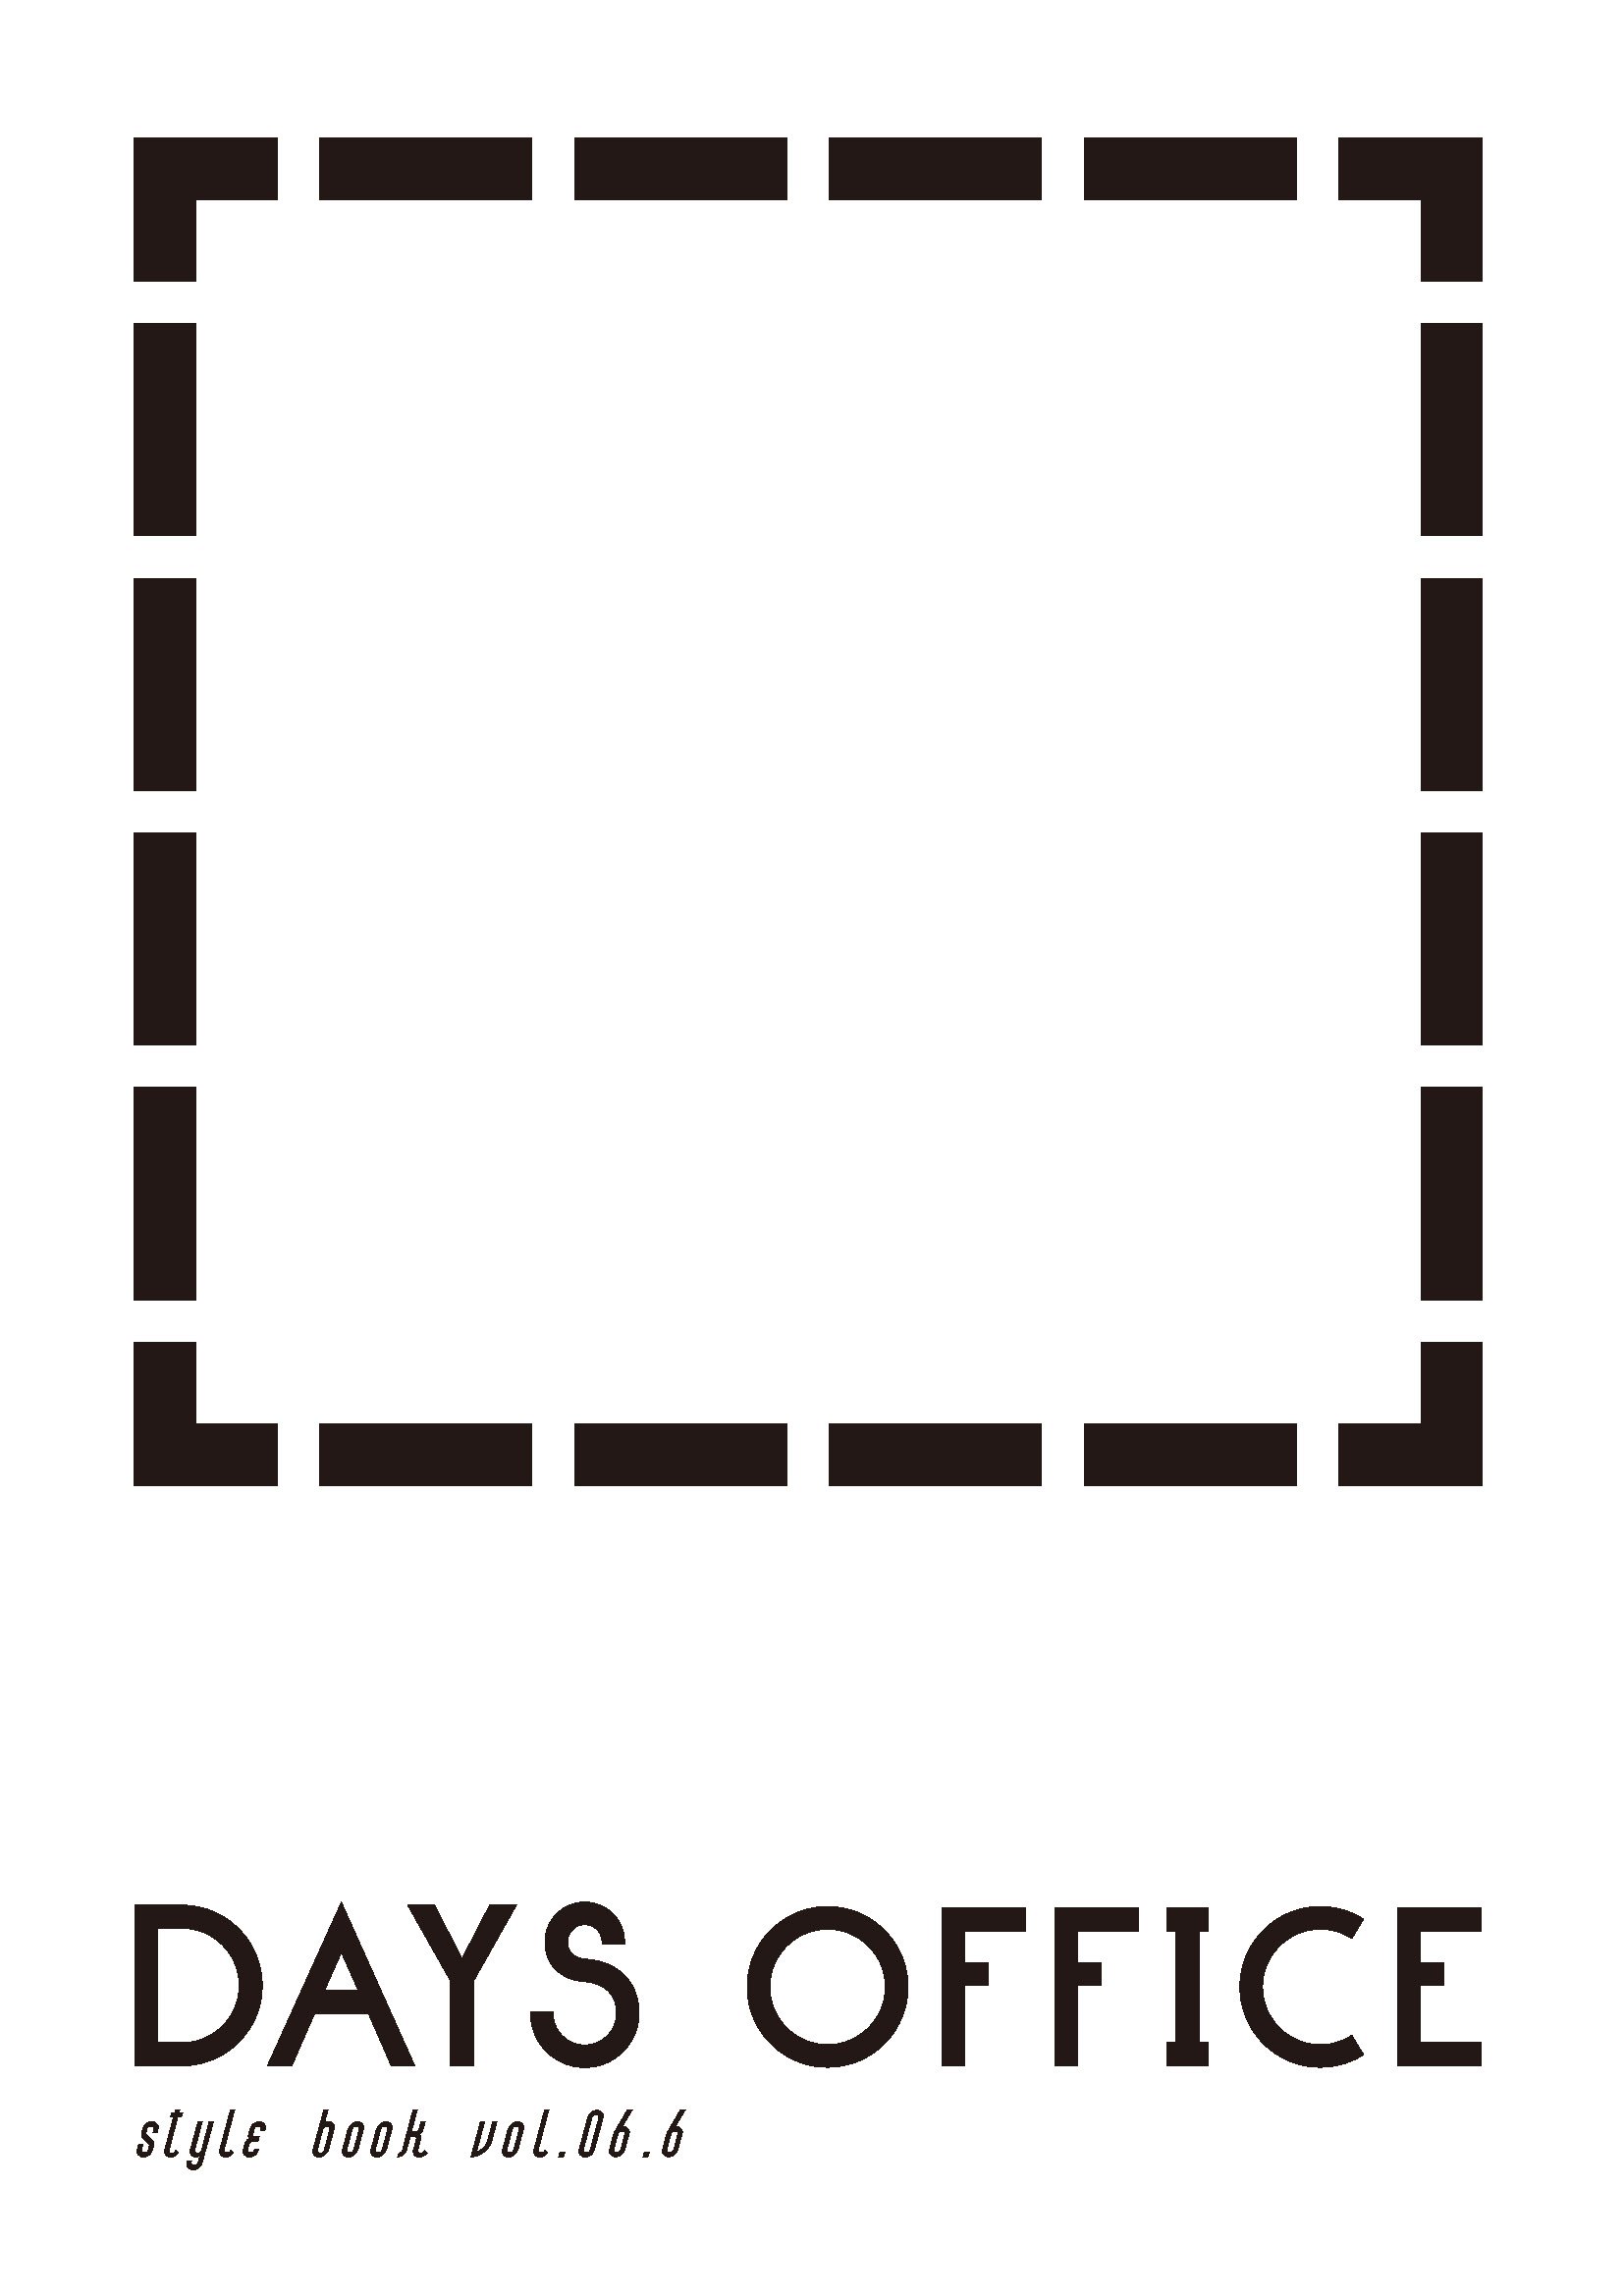 DAYS OFFICE STYLE BOOK Vol.6.6